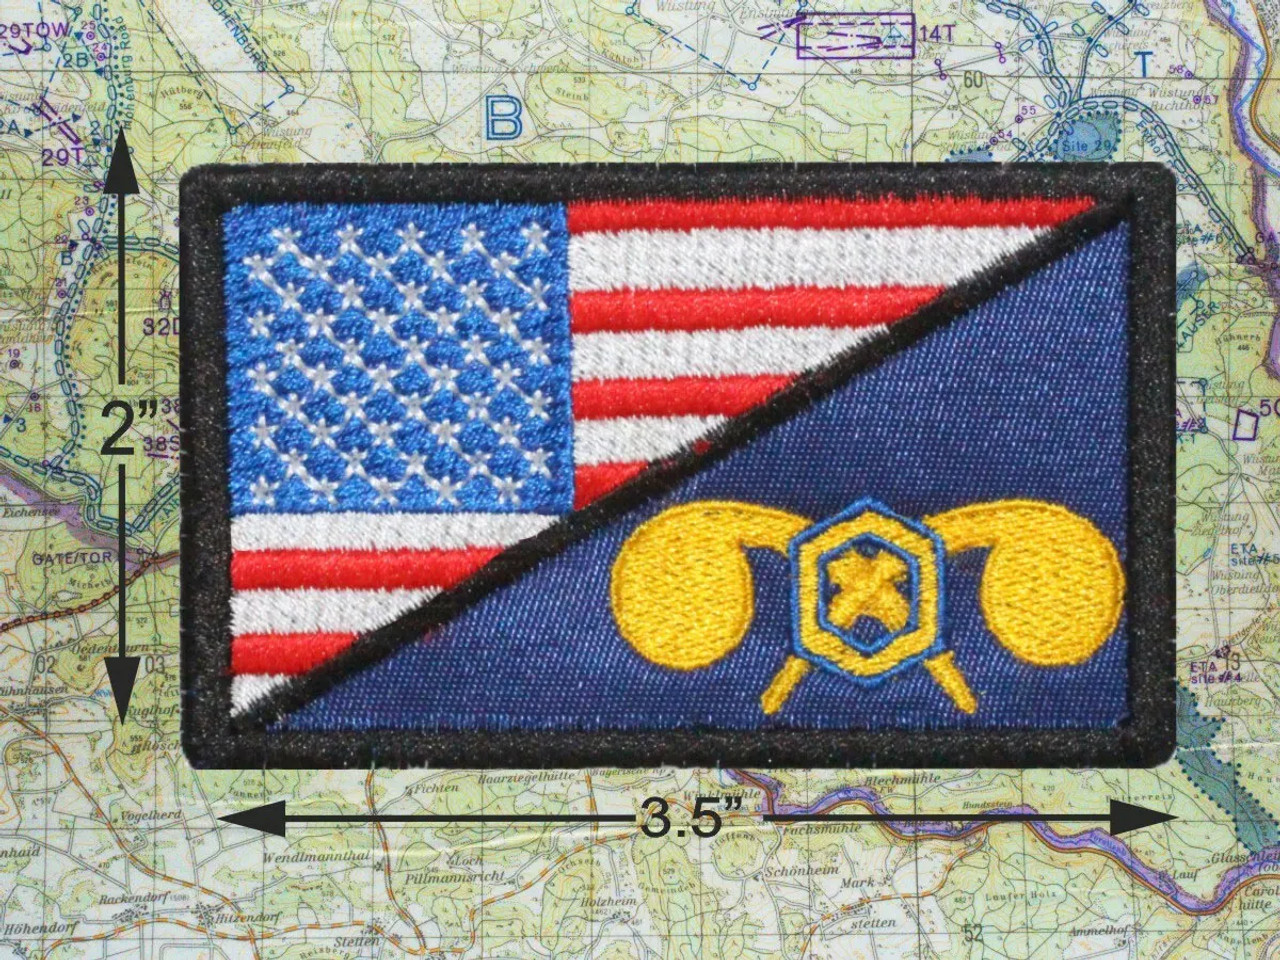 American Flag Patch - FD, PD, Military